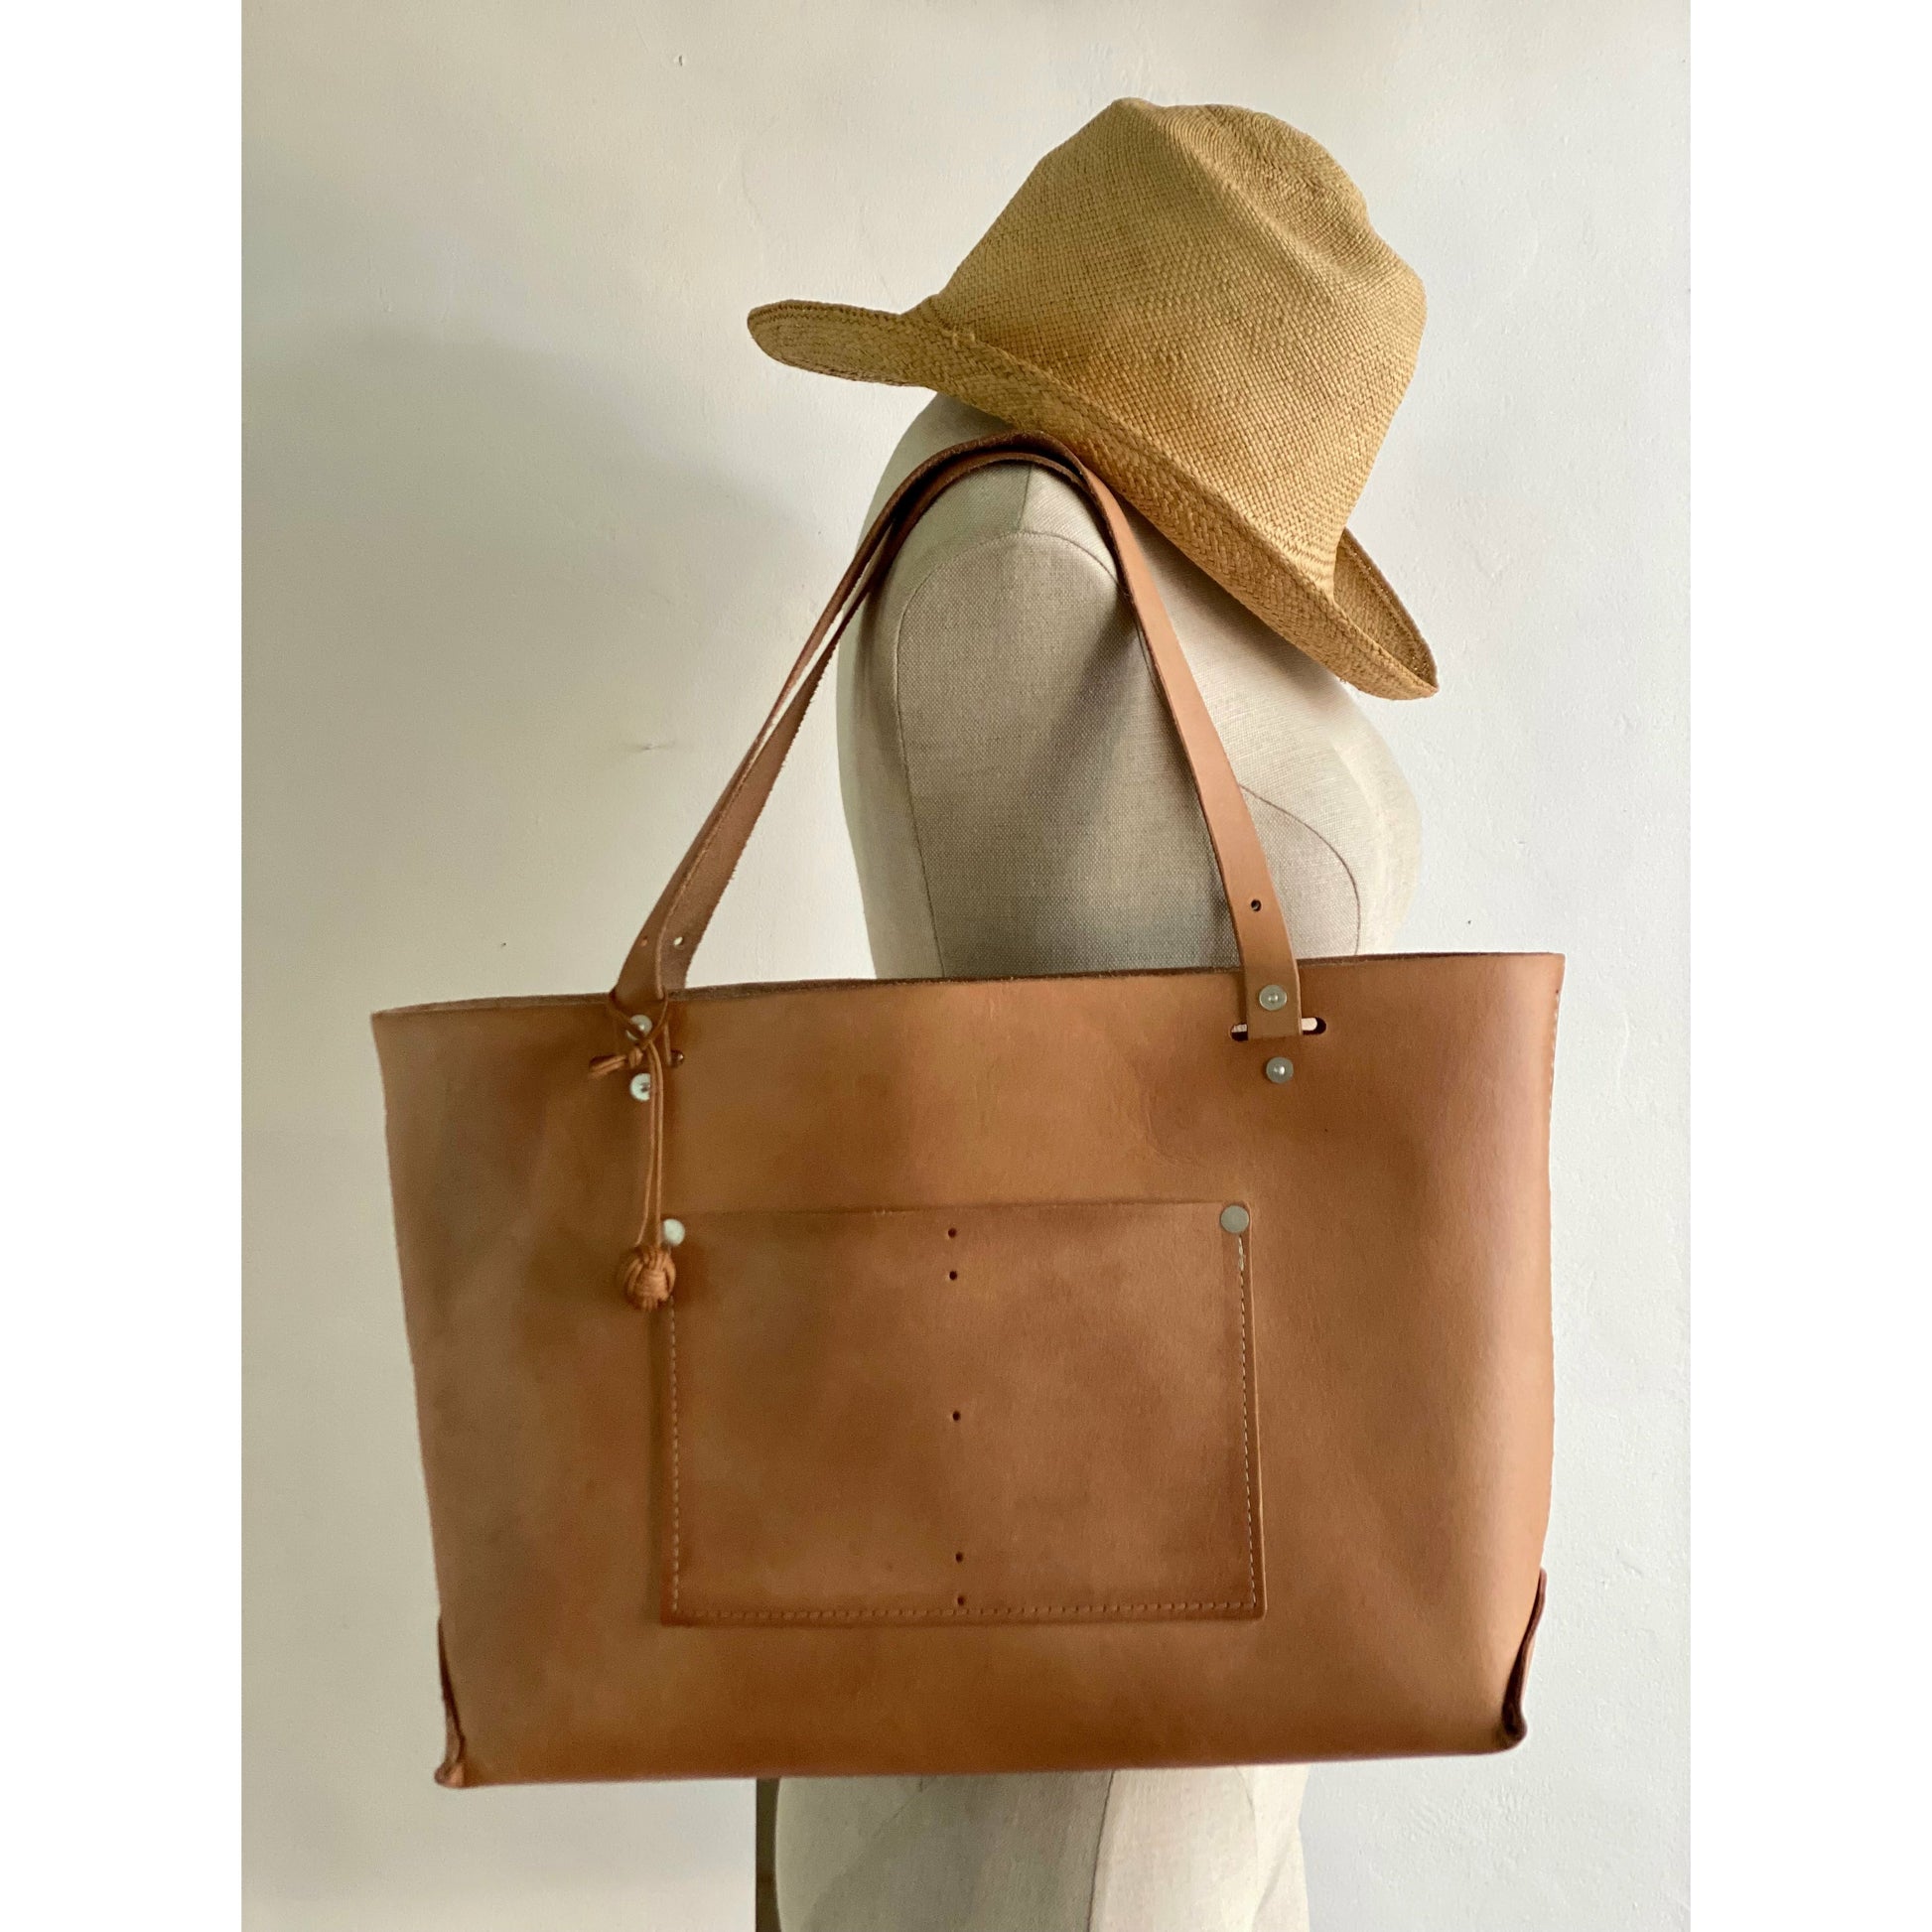 Large Leather Bag or Tote with outside pockets and should length straps.